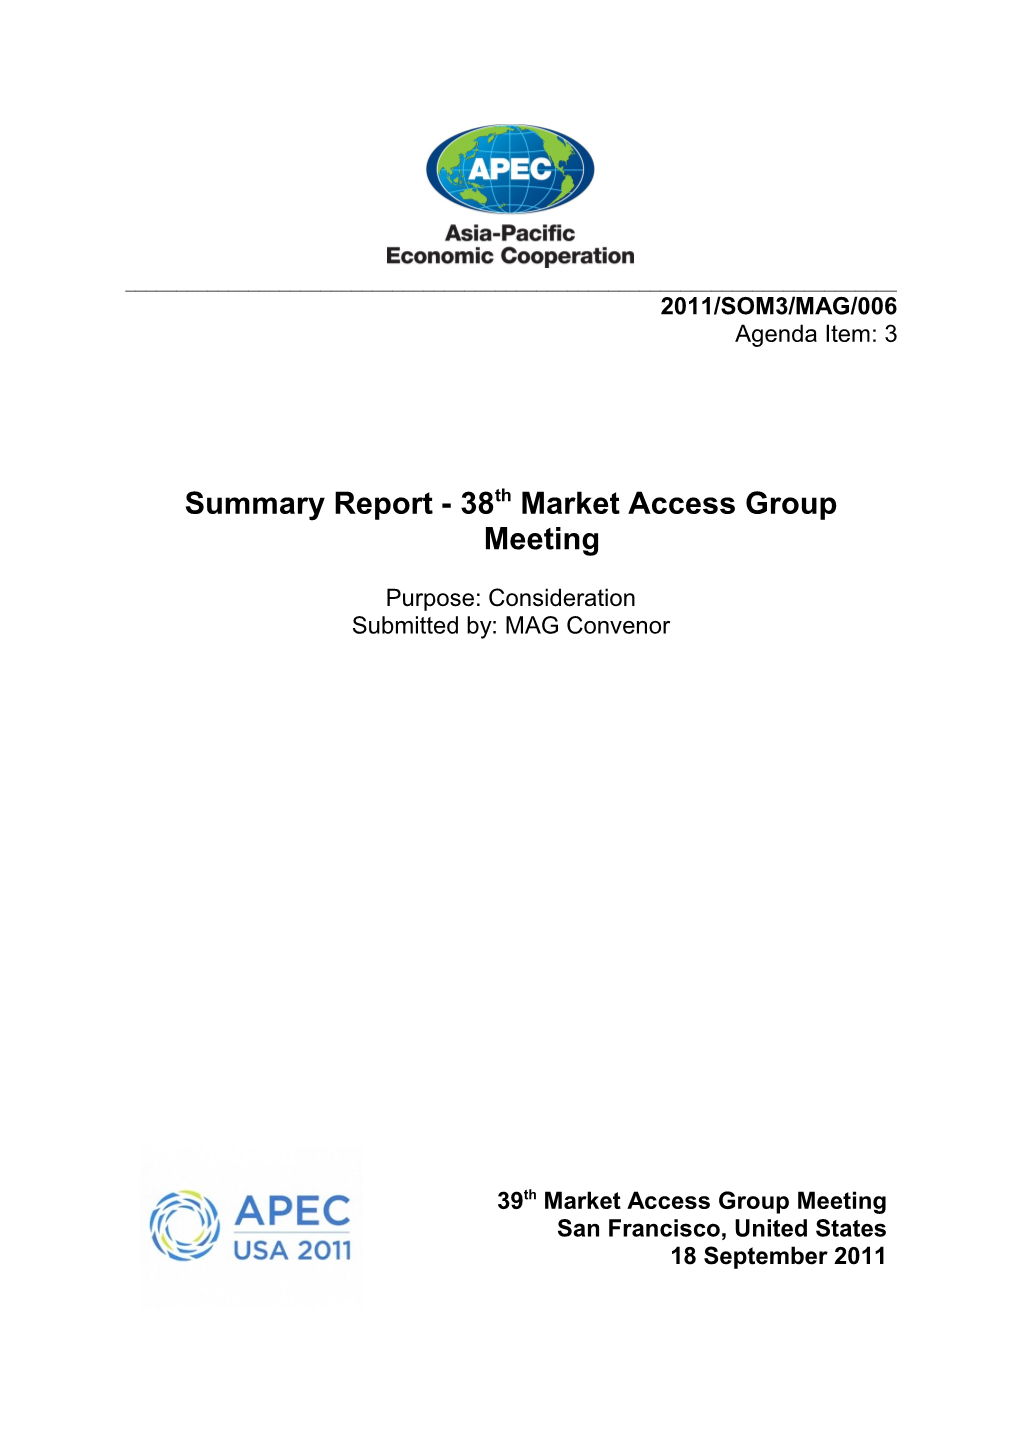 Summary Report - 38Thmarket Access Group Meeting